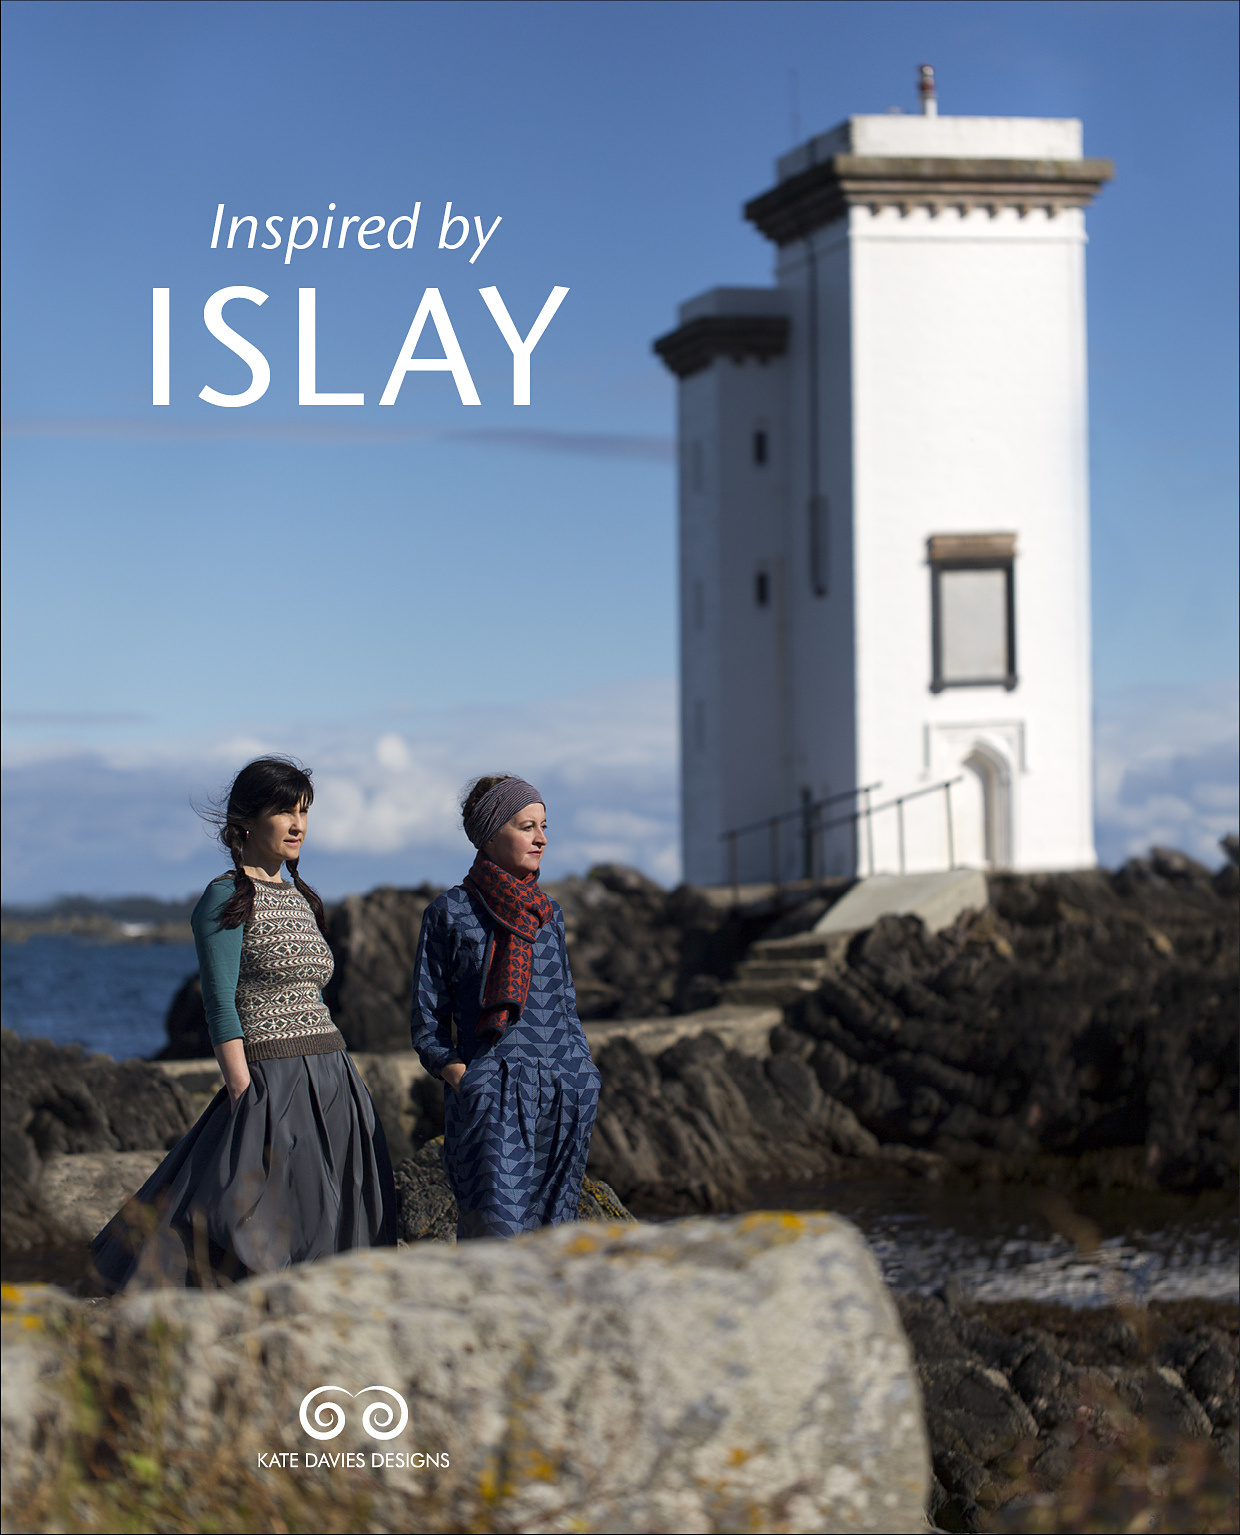 Kate Davies, „Inspired by Islay”, Englisch